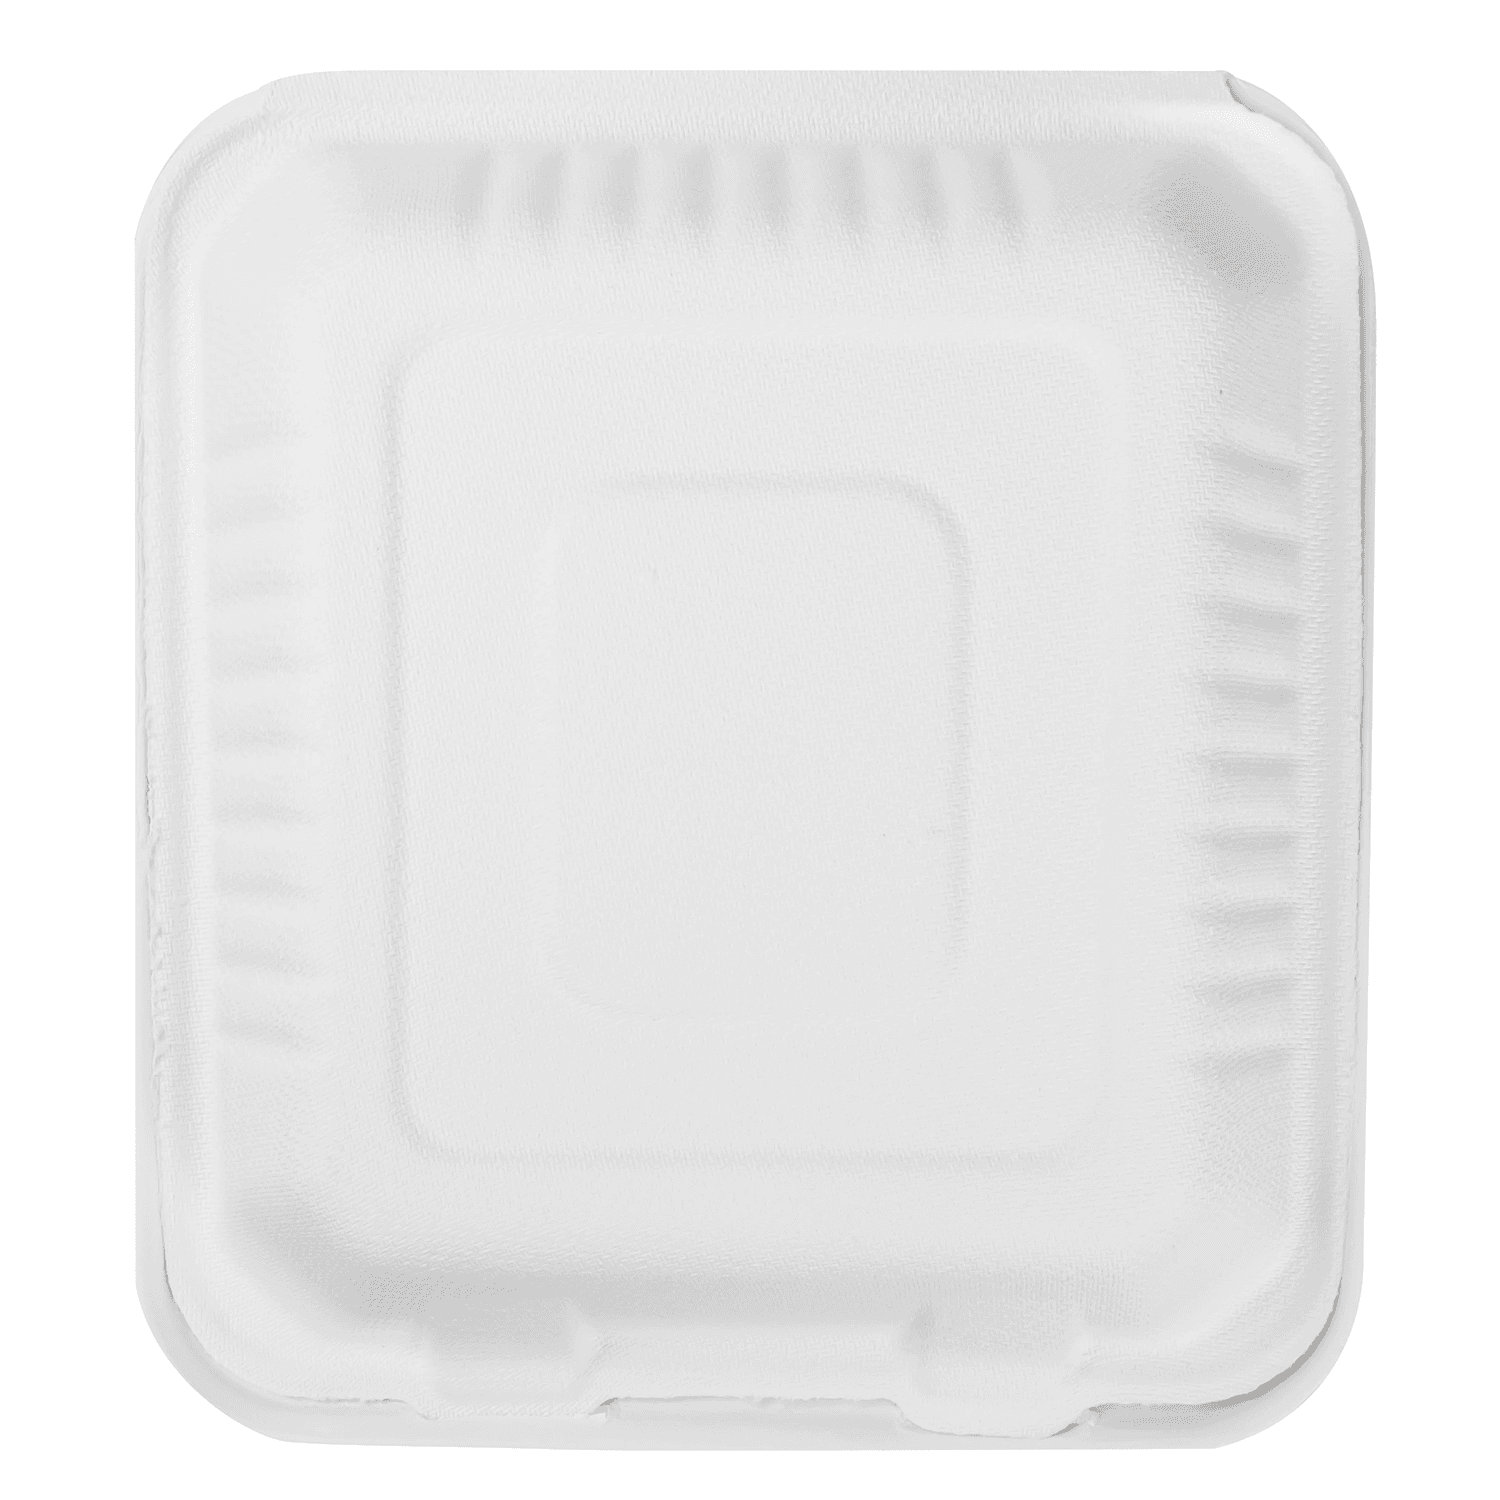 Karat Earth 8''x8'' PFAS Free Compostable Bagasse Hinged Containers, White - 200 pcs